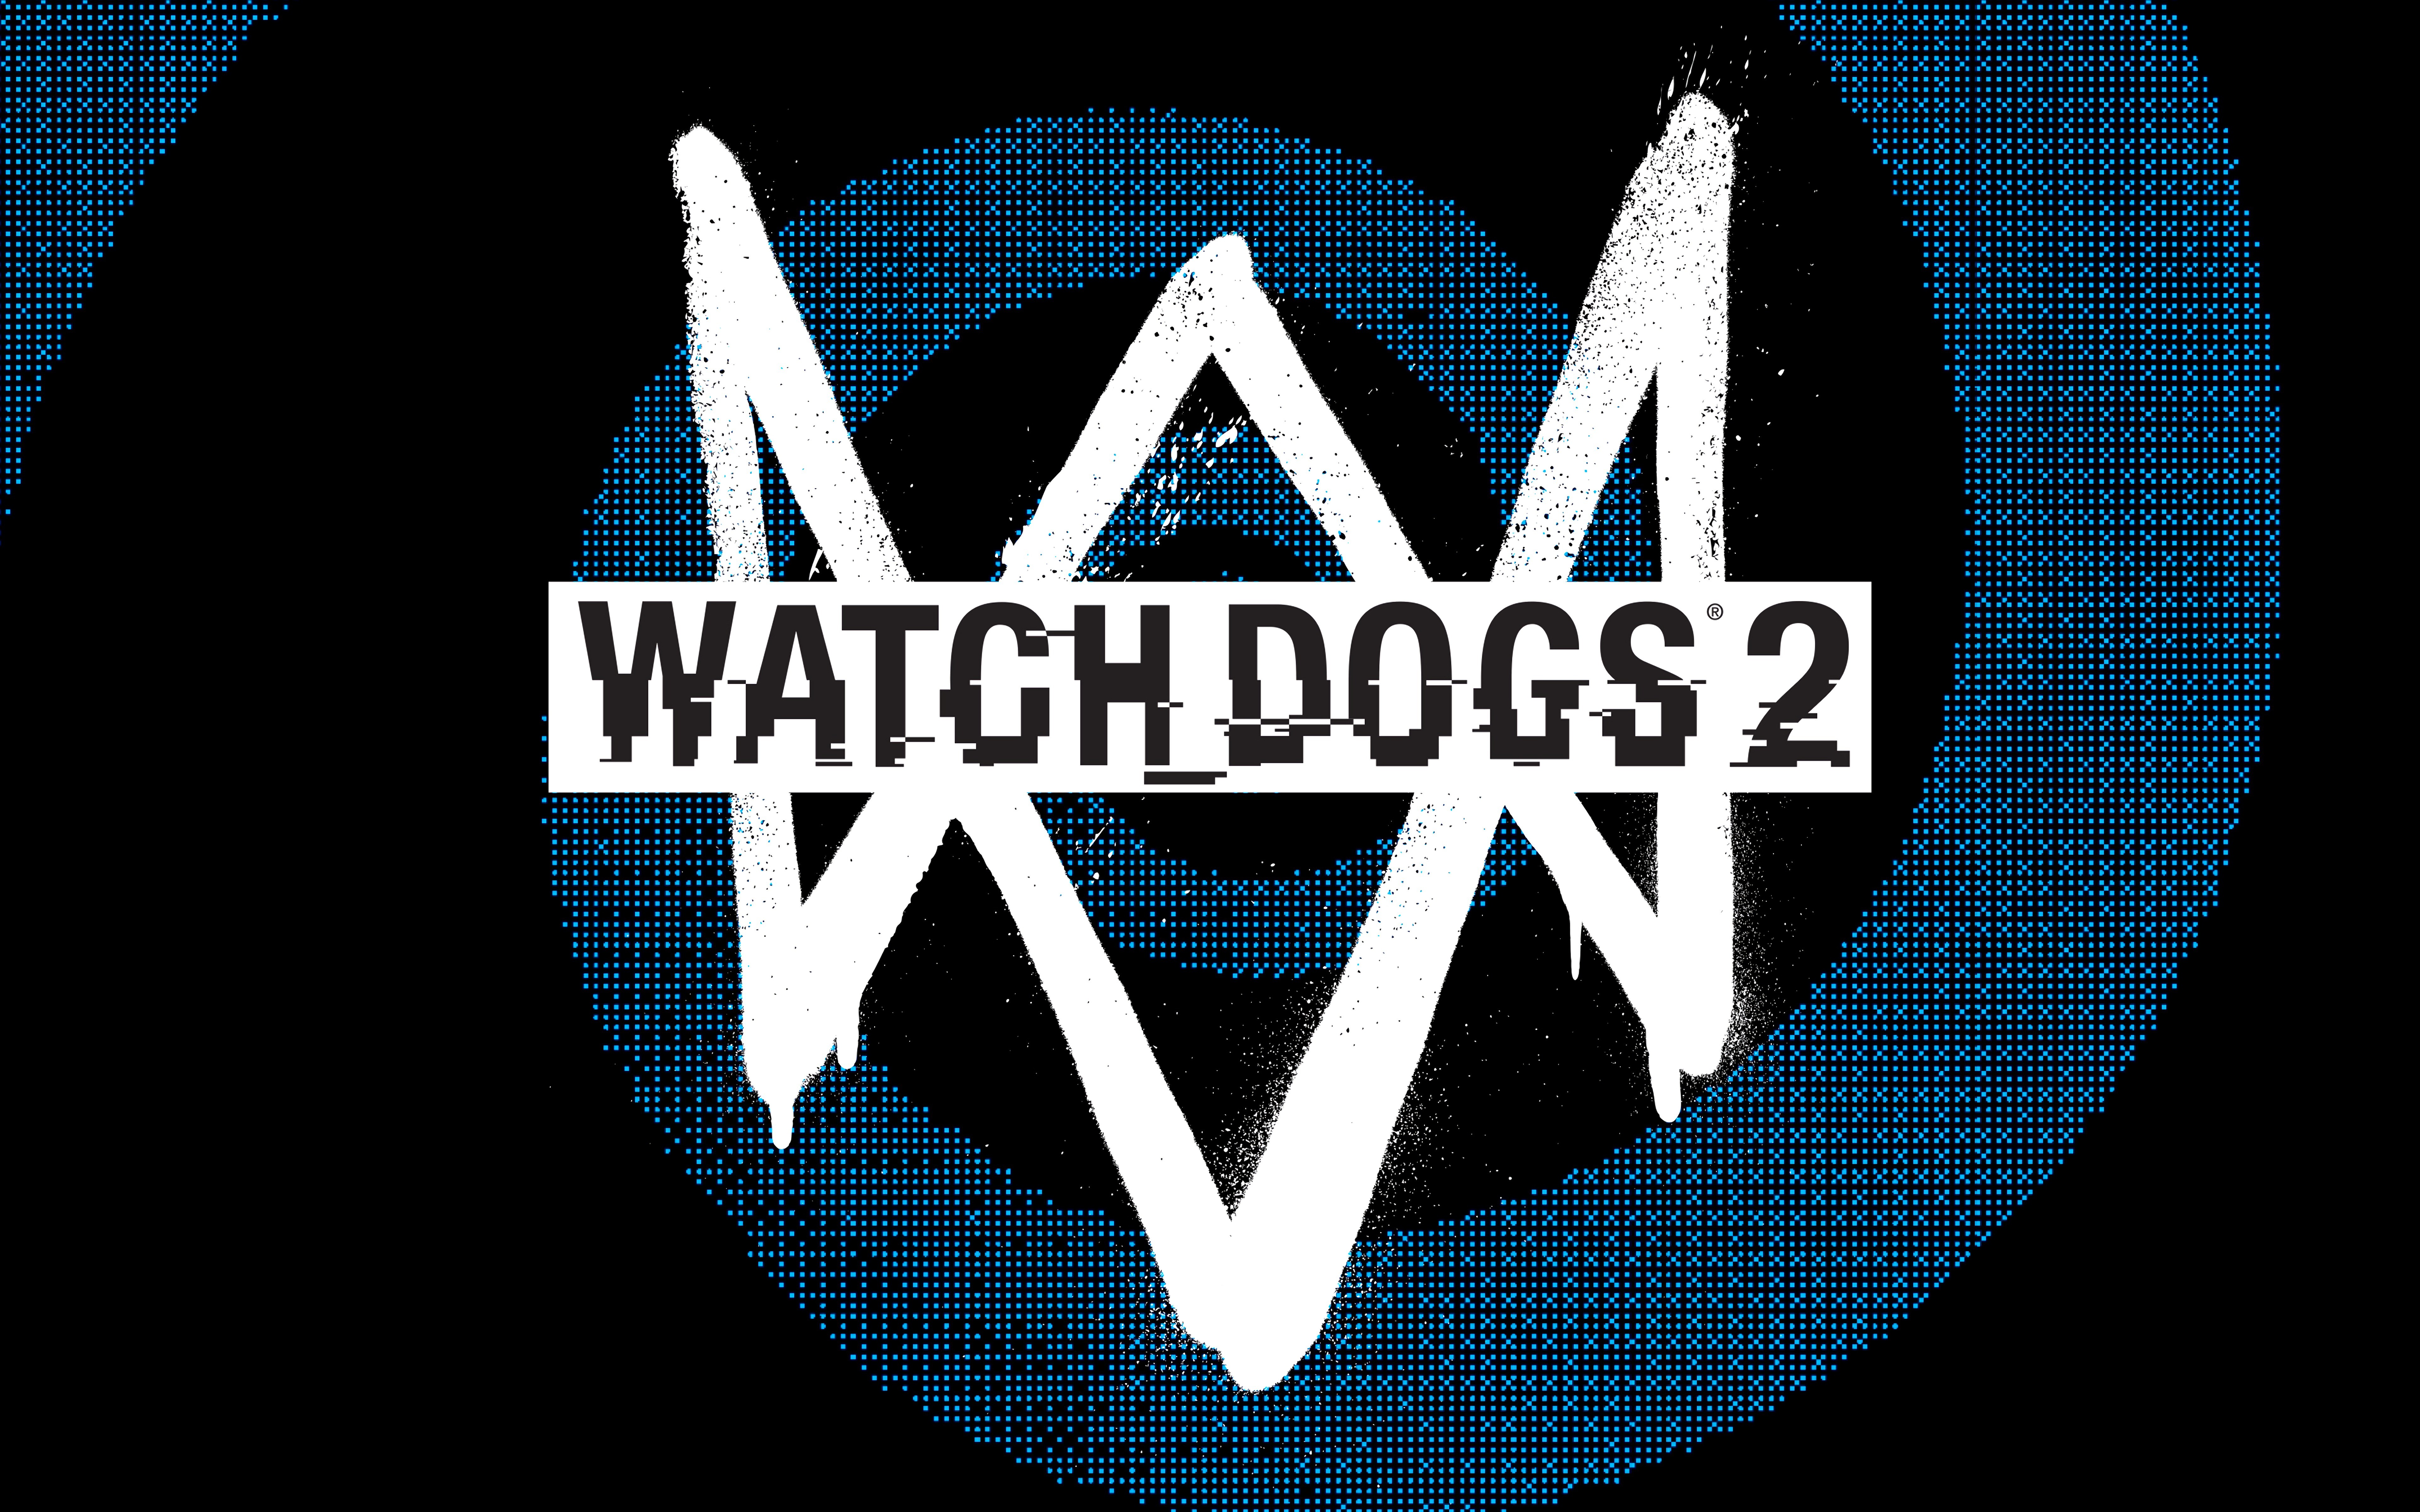 Upcoming Games Watch Dogs 2 Hackers Hacking 7680x4800